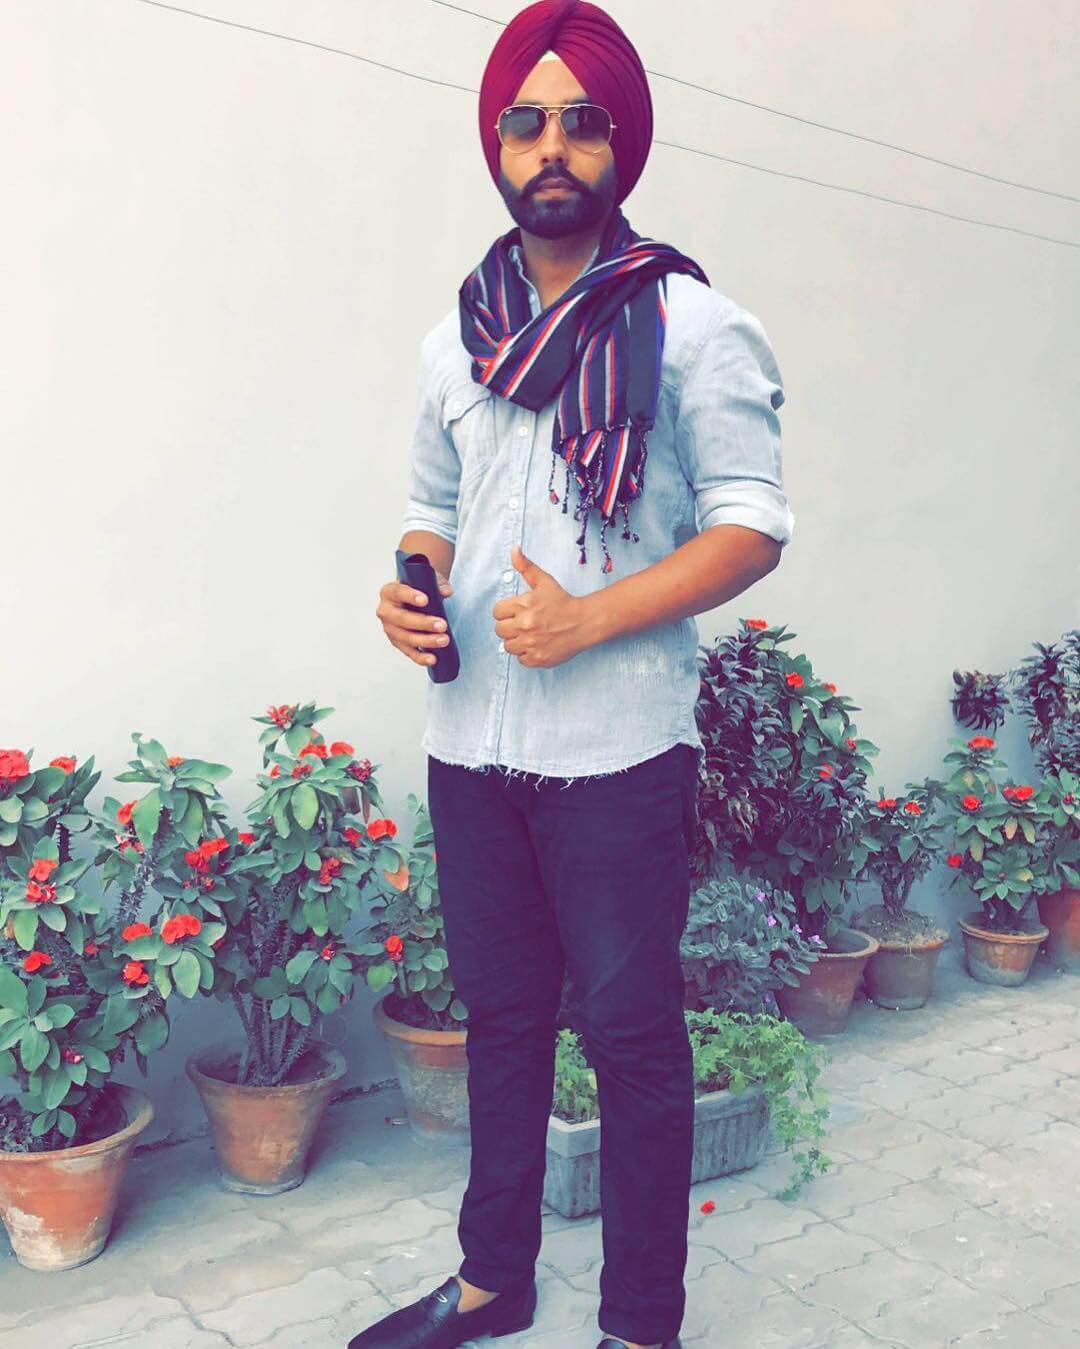 Lovely Ammy Virk New Image. Beautiful image HD Picture & Desktop